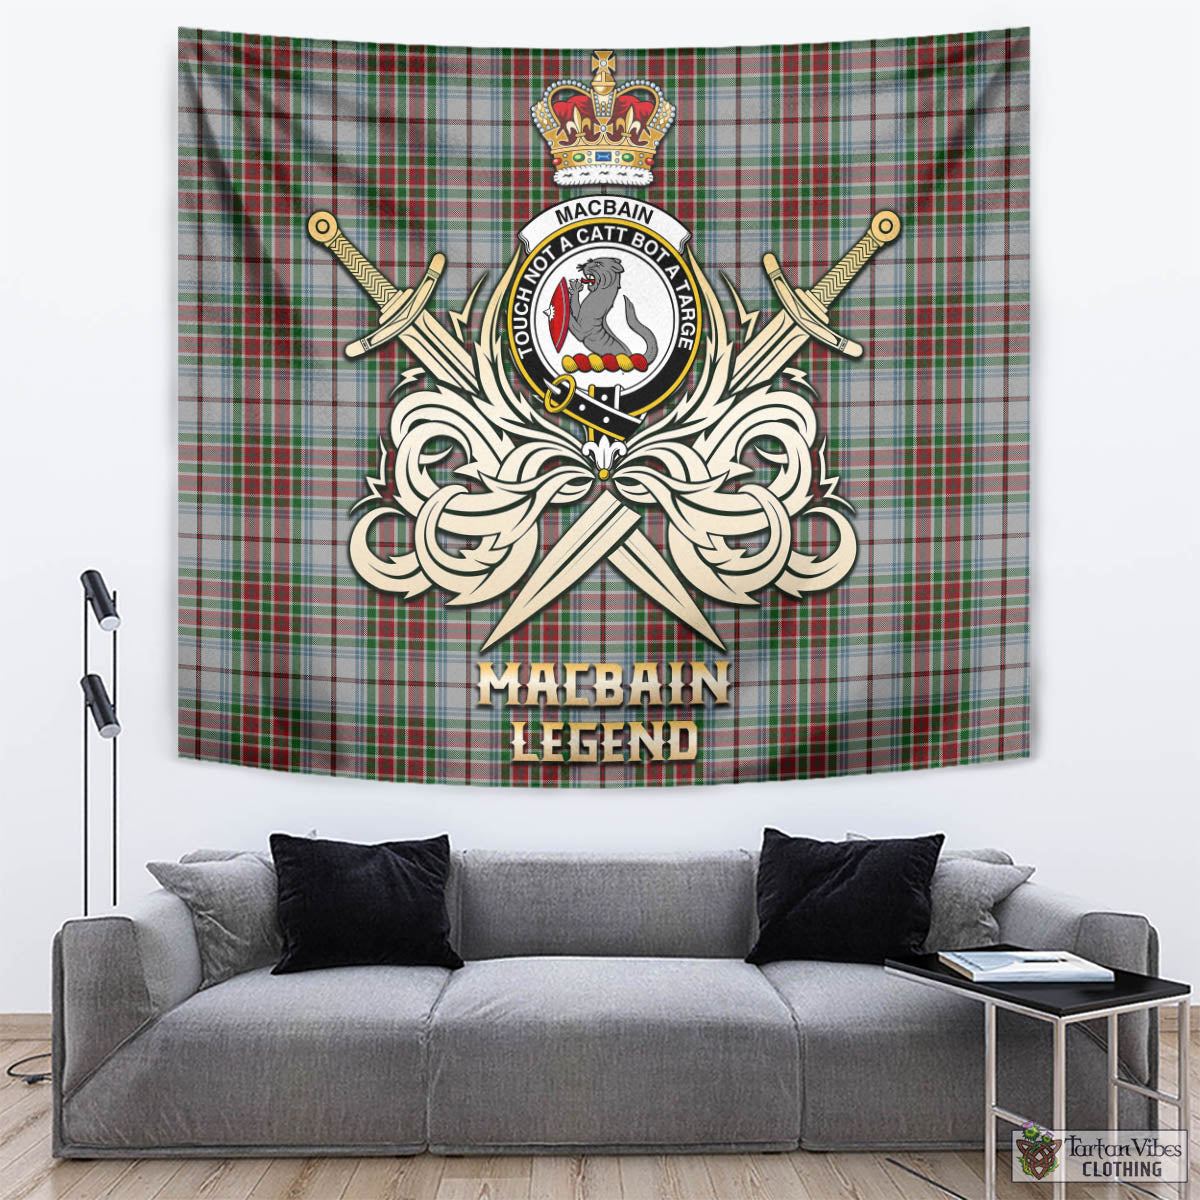 Tartan Vibes Clothing MacBain Dress Tartan Tapestry with Clan Crest and the Golden Sword of Courageous Legacy